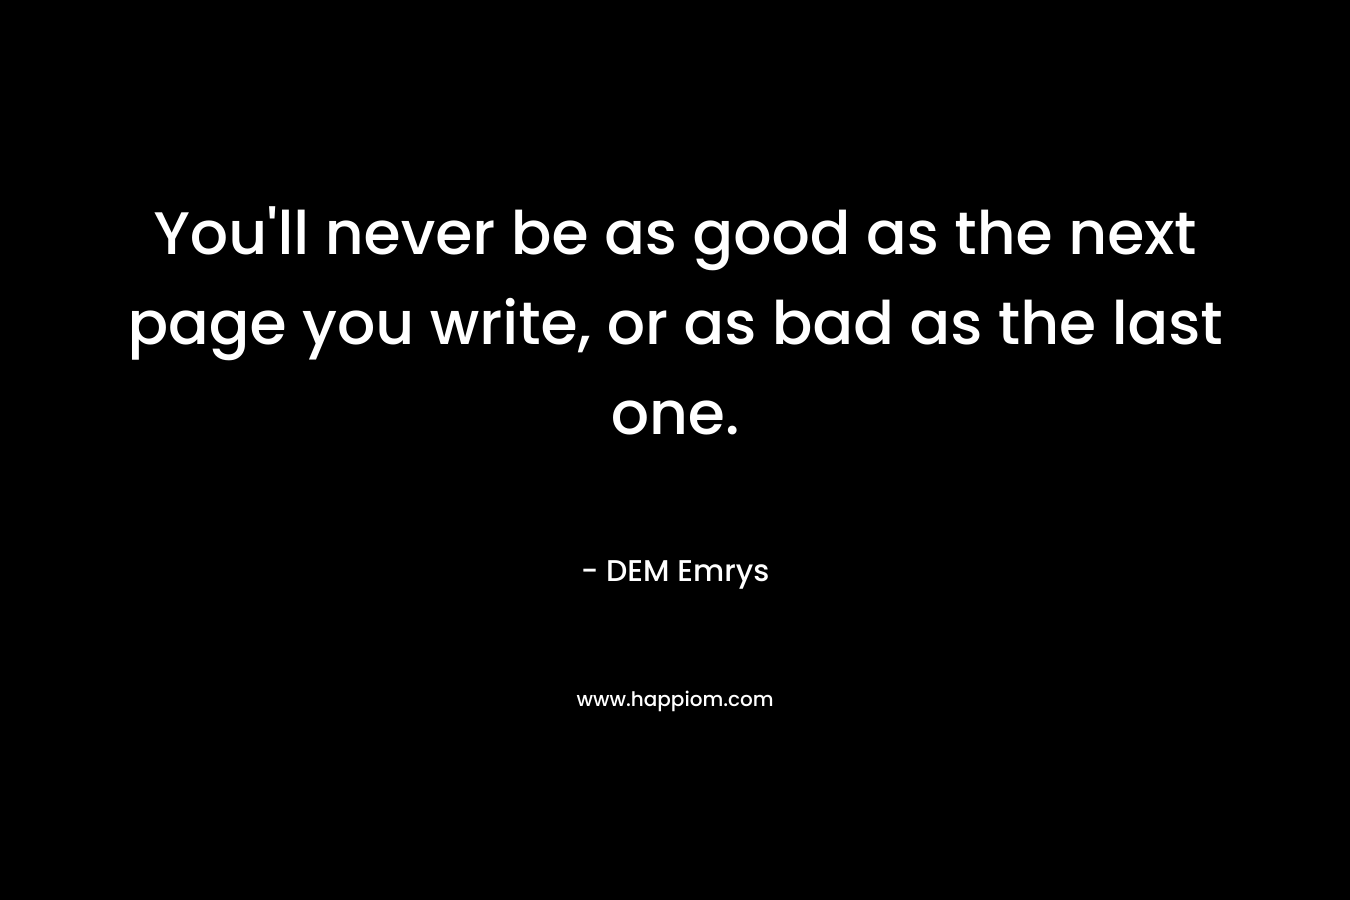 You’ll never be as good as the next page you write, or as bad as the last one. – DEM Emrys